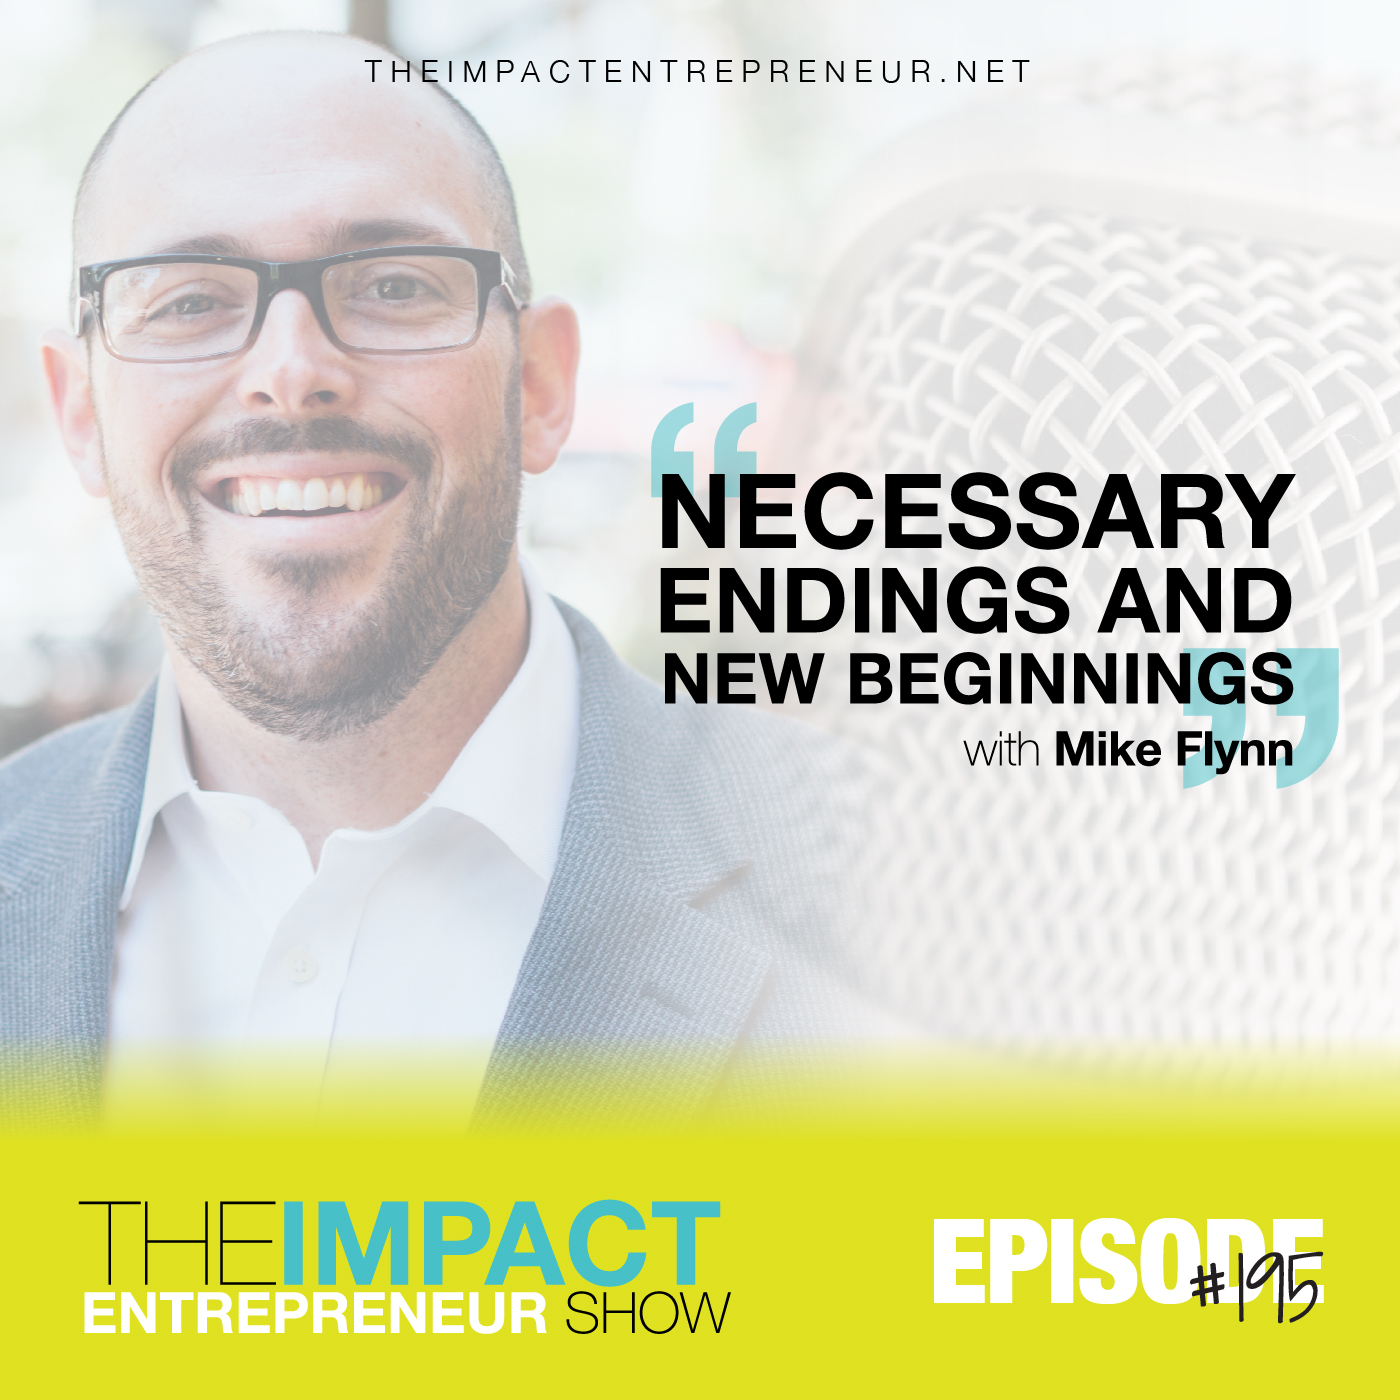 Ep. 195 - Necessary Endings and New Beginnings